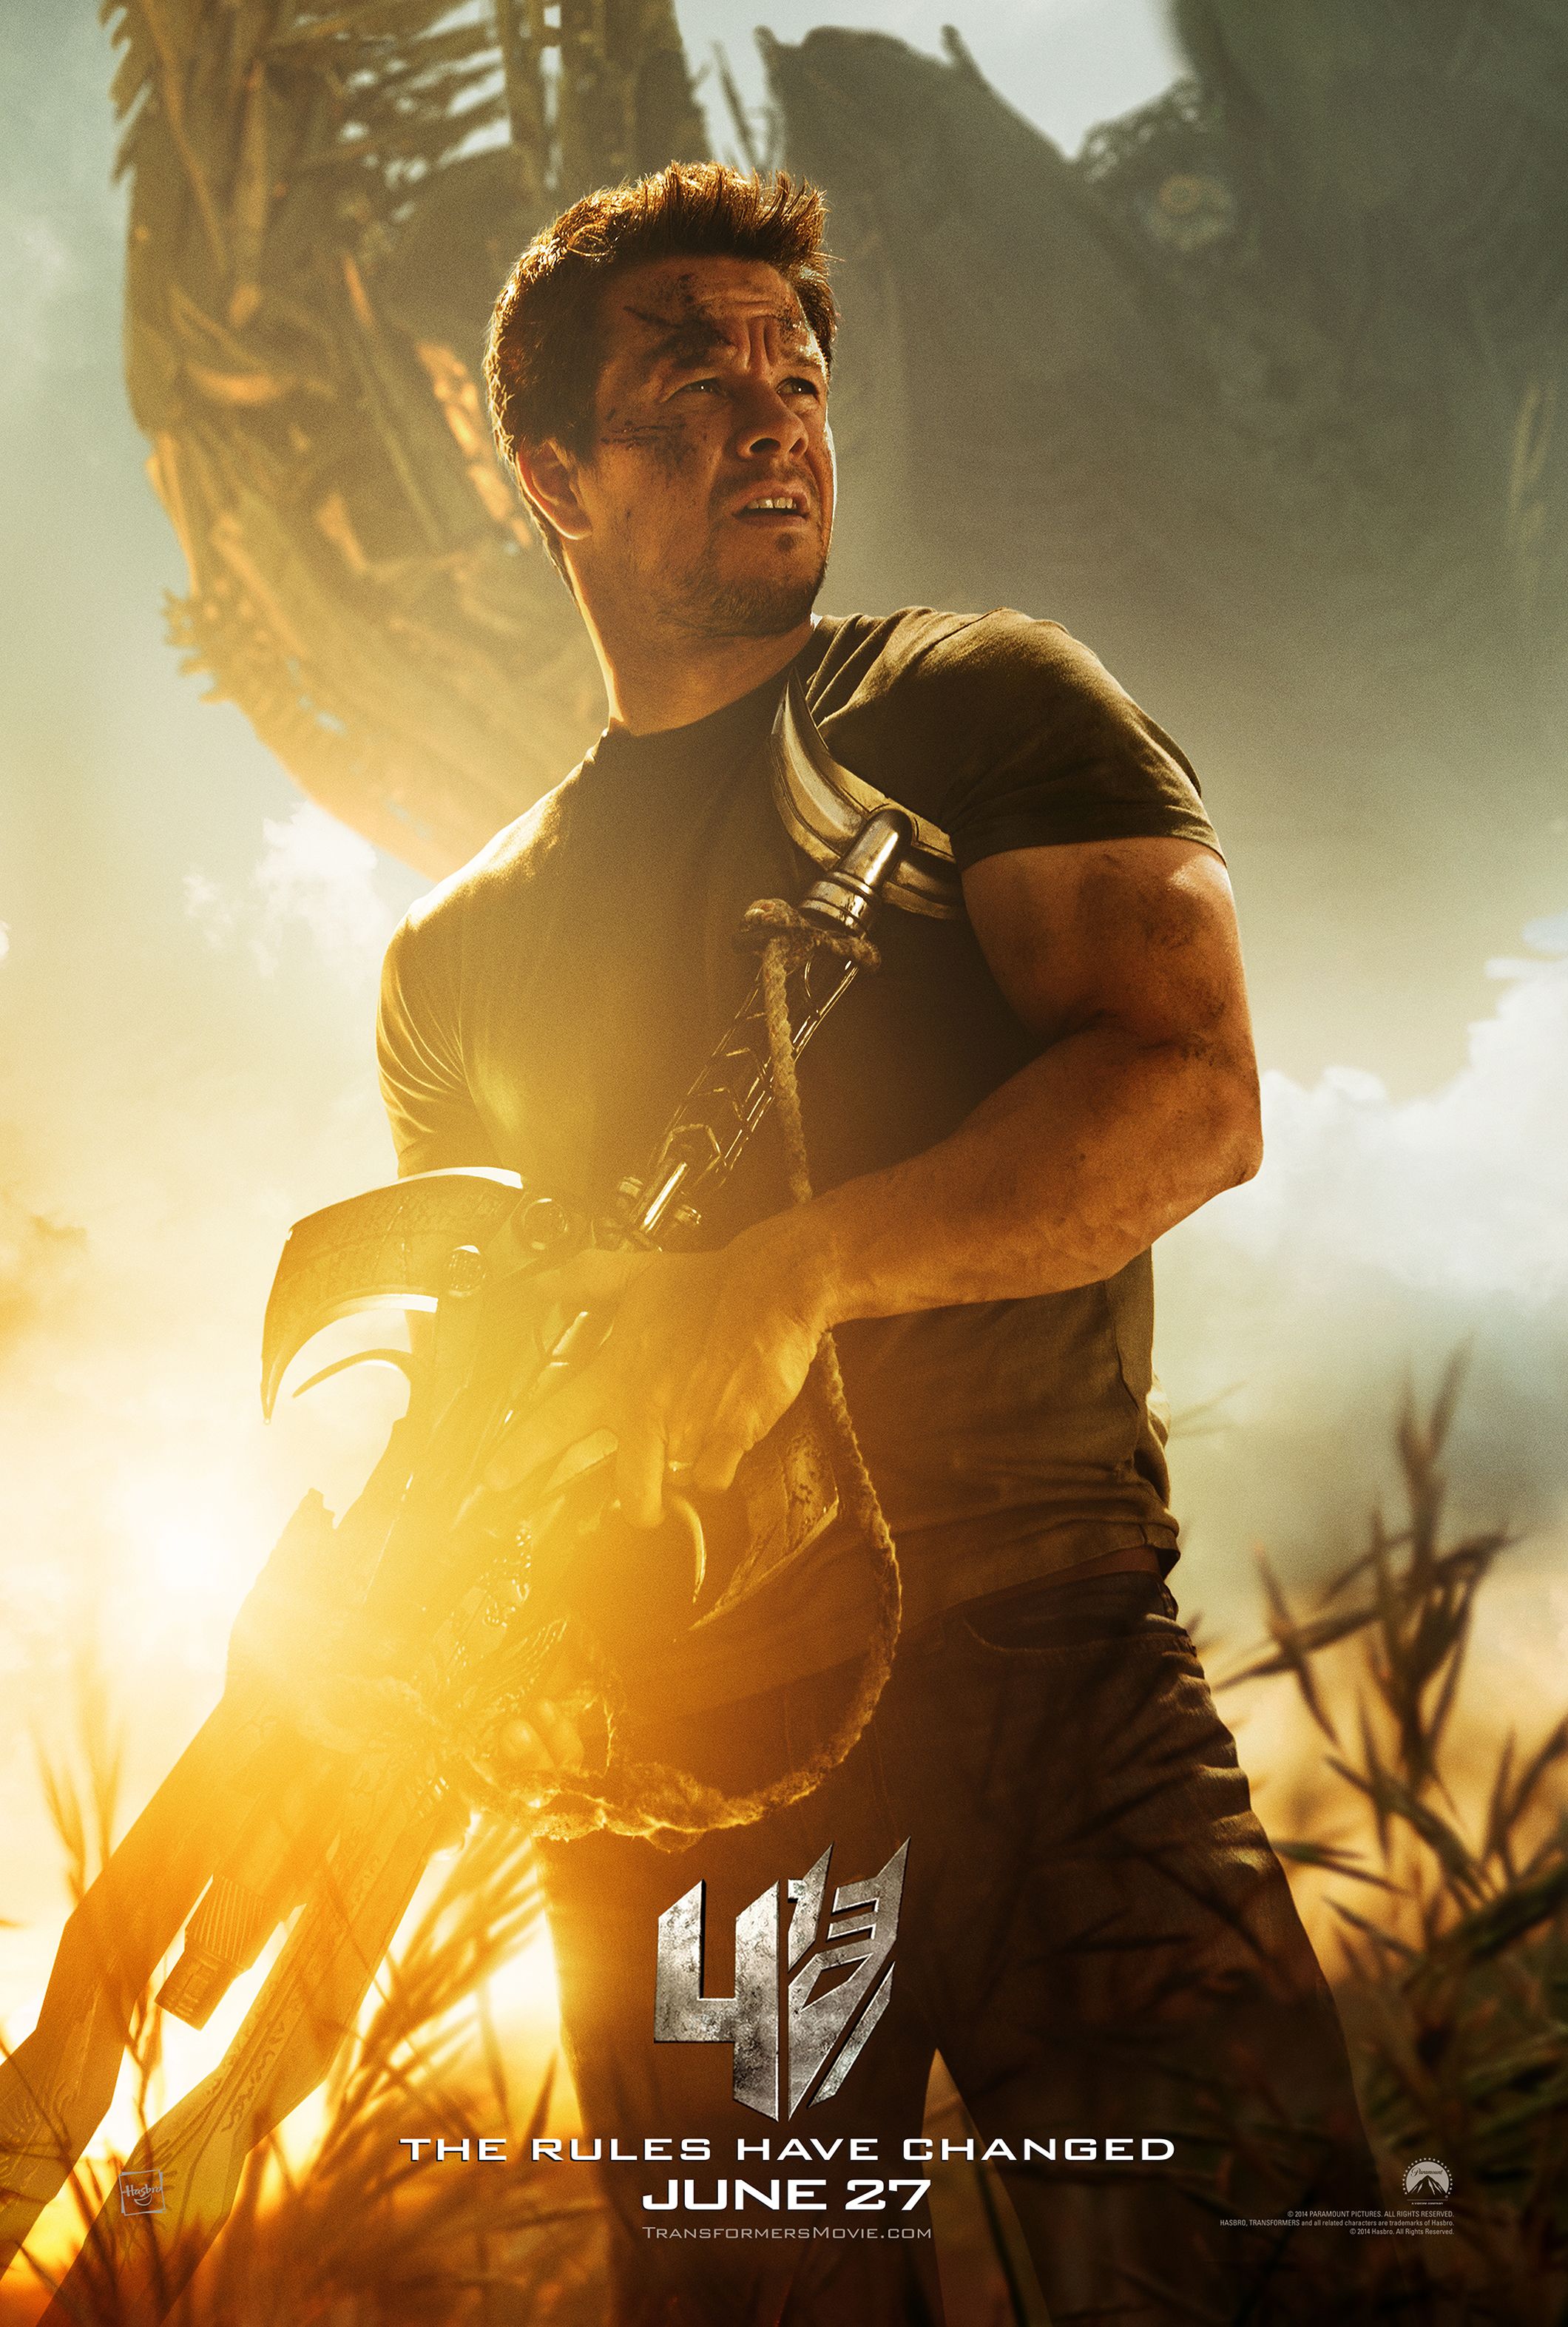 Transformers 4 Mark Wahlberg Poster